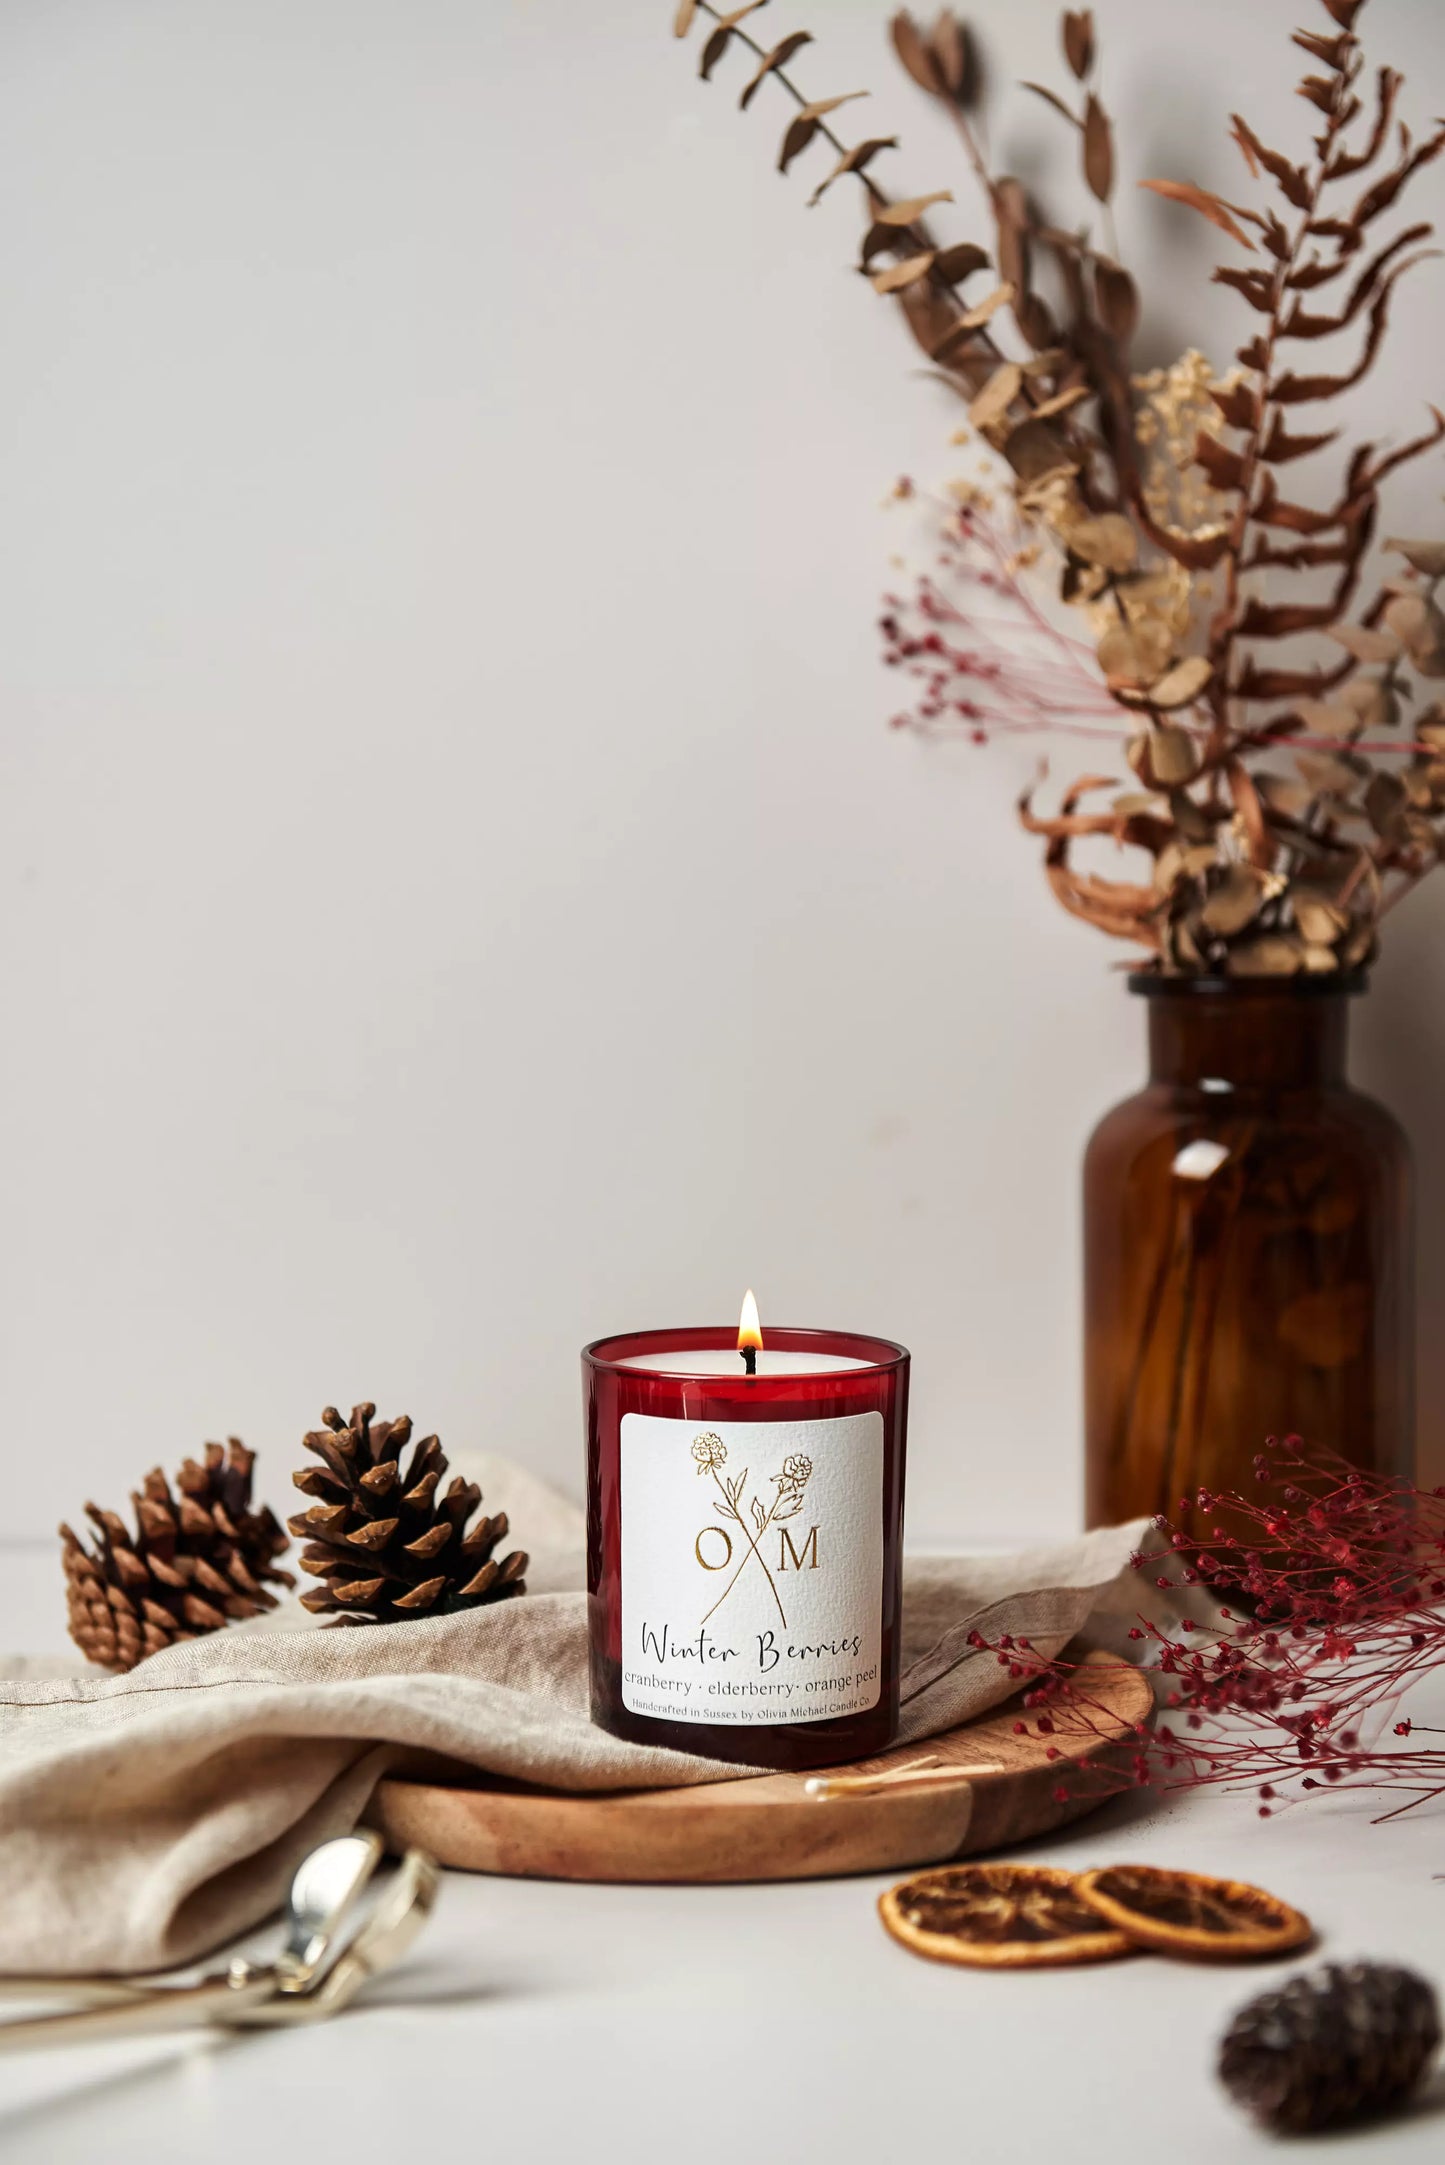 Our cranberry and elderberry scented candle is lit and on display in an amber glass jar.